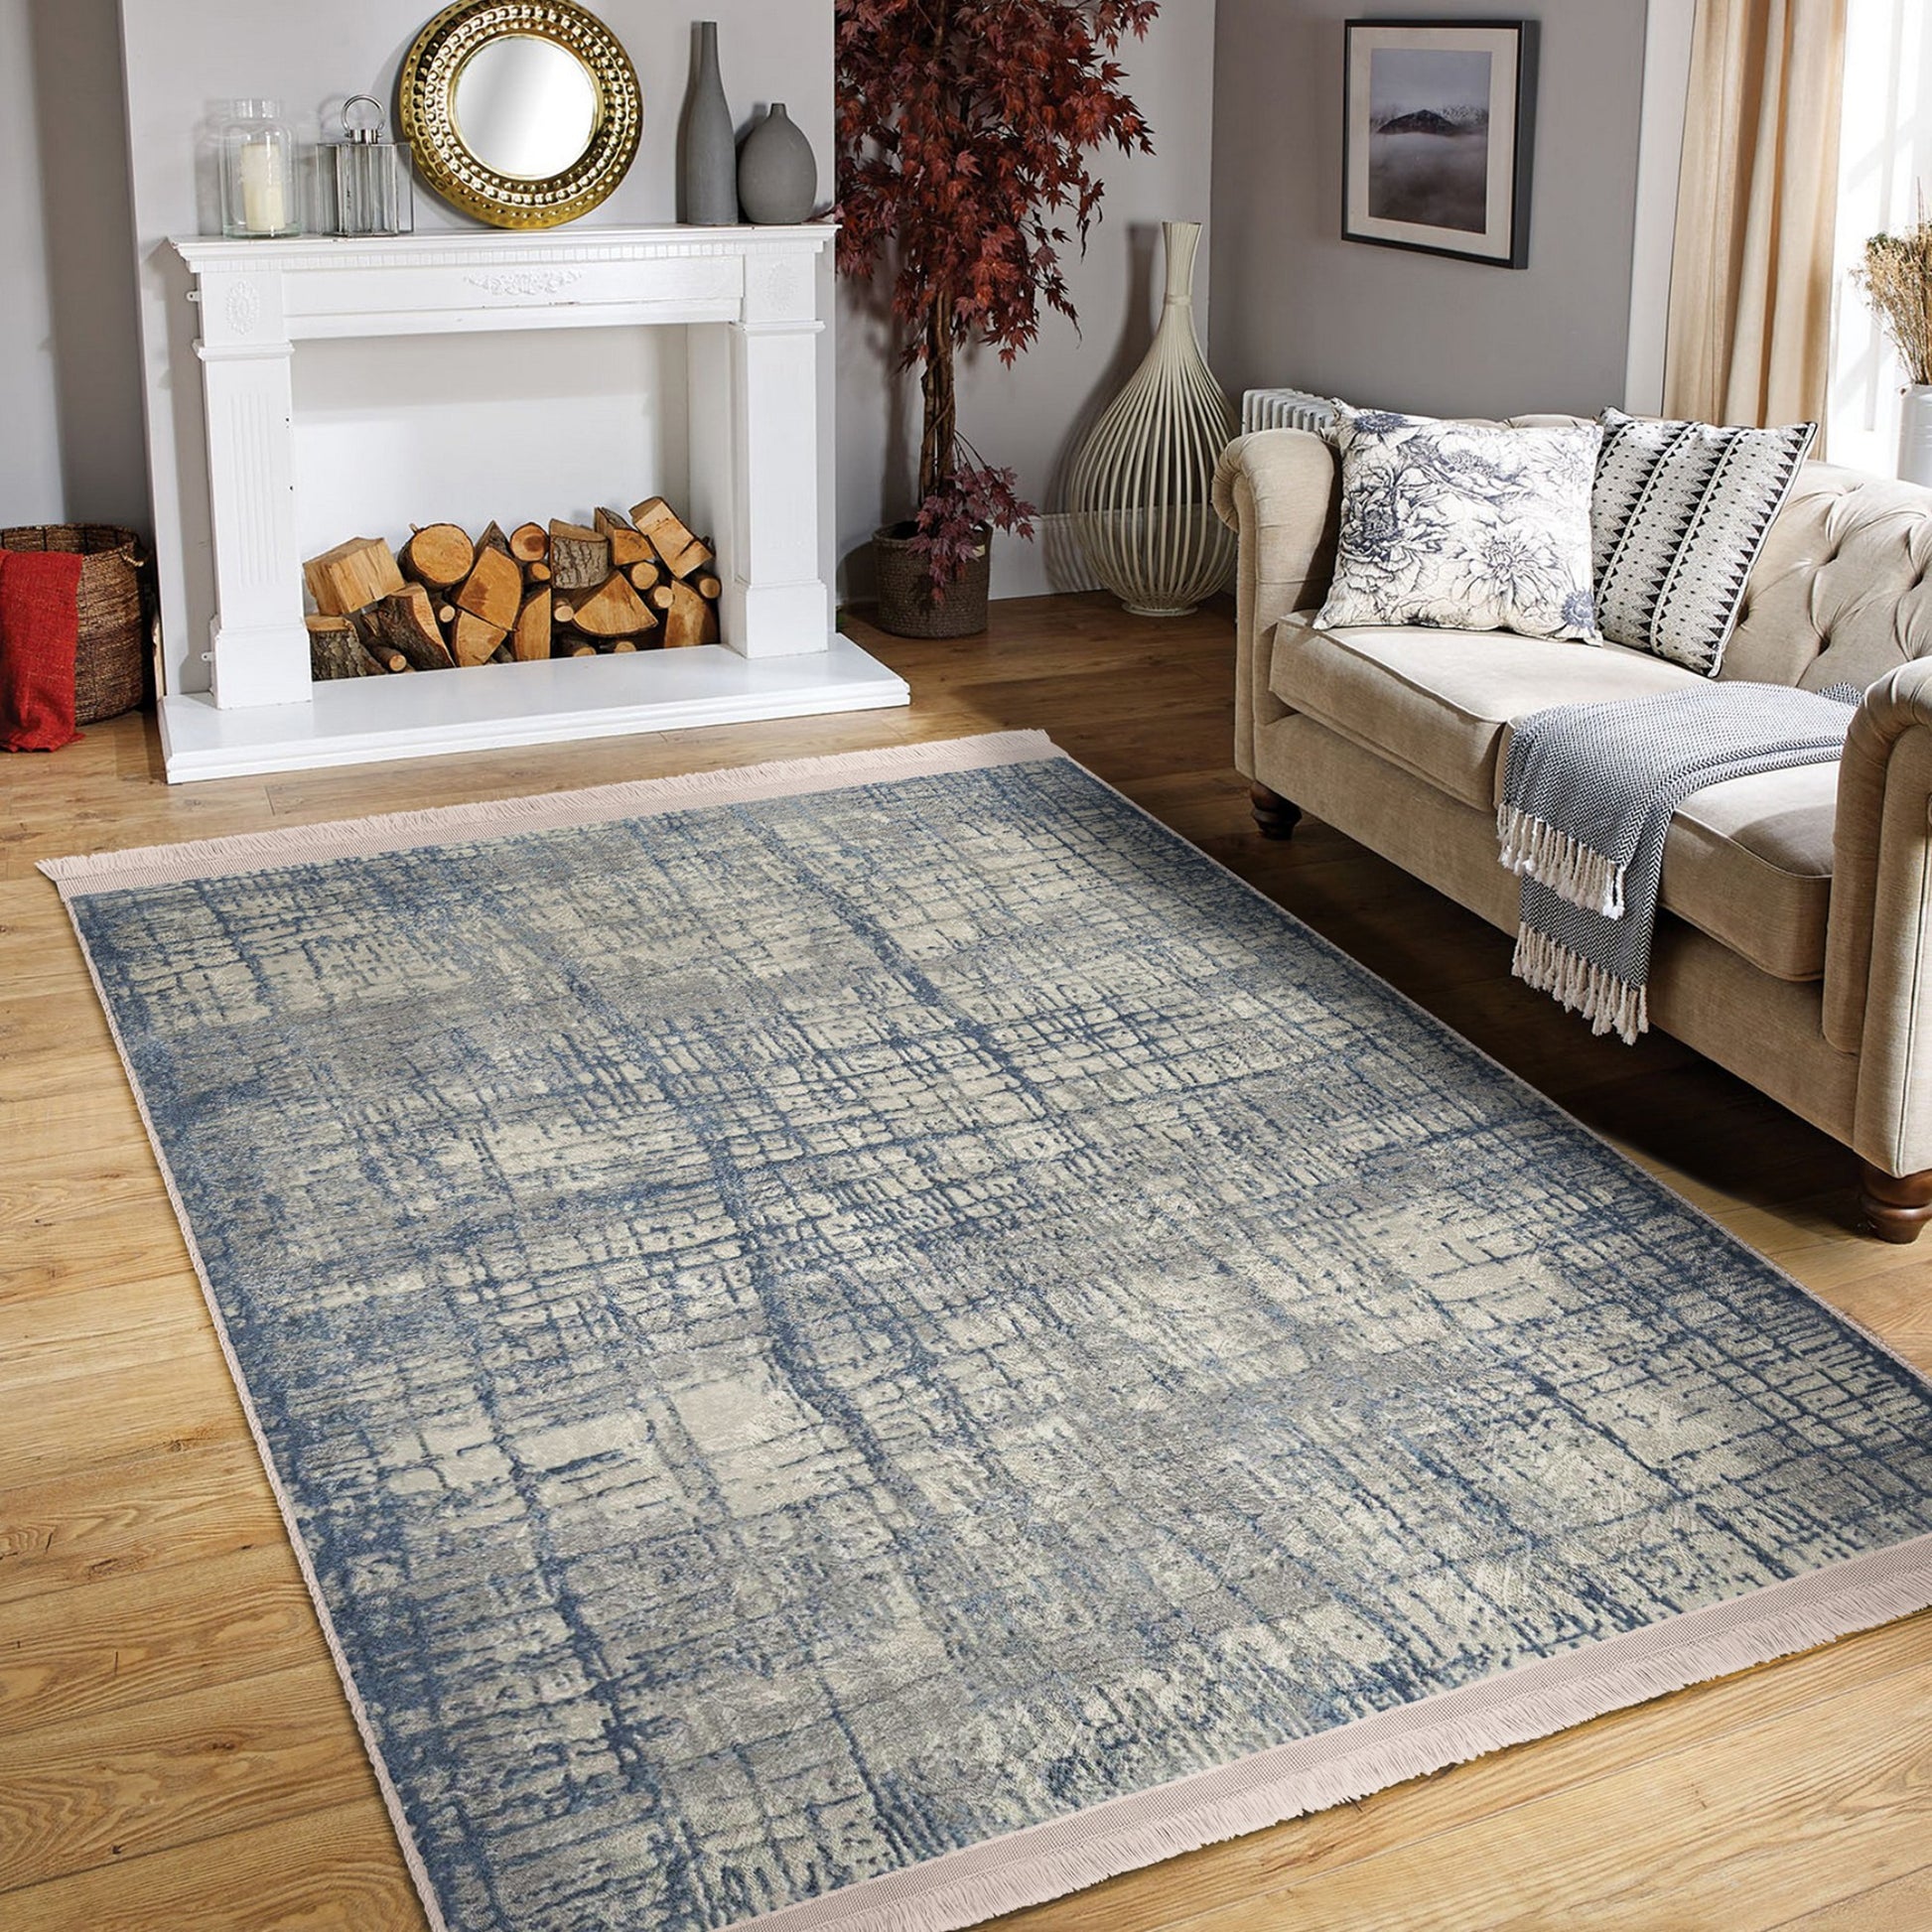 Rustic Patterned Area Rug for a Serene Interior